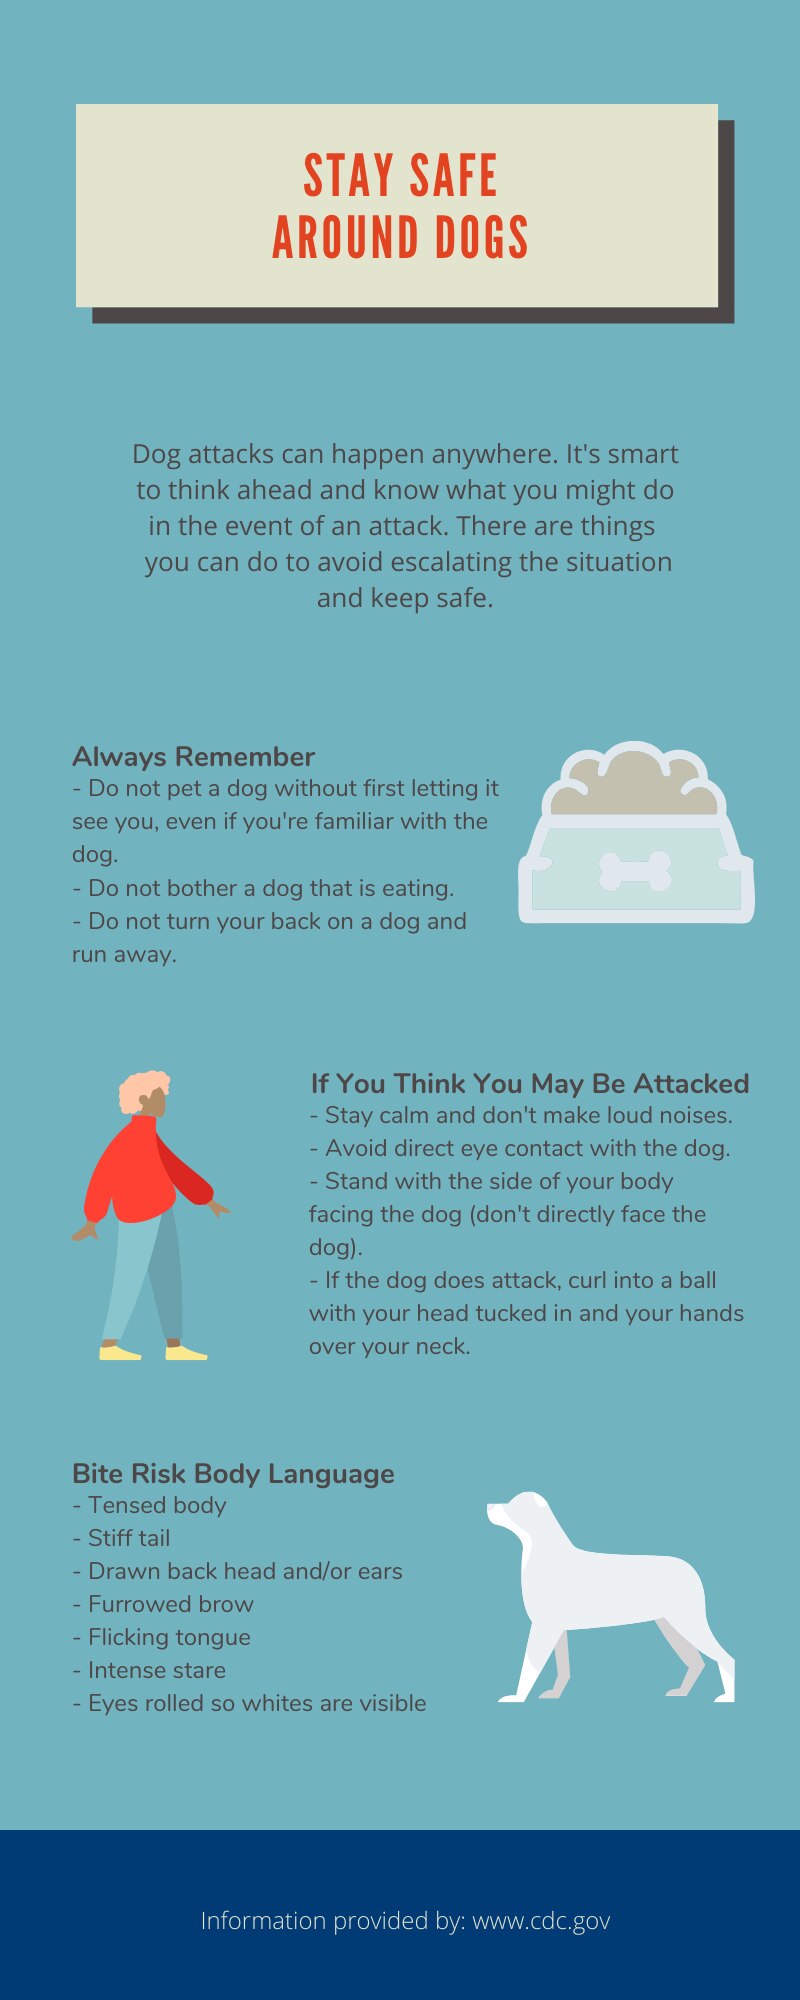 Dog attacks can happen anywhere. It’s smart to think ahead and know how to react in the event of an attack. (U.S. Air Force infographic by Airman Amanda Lovelace)